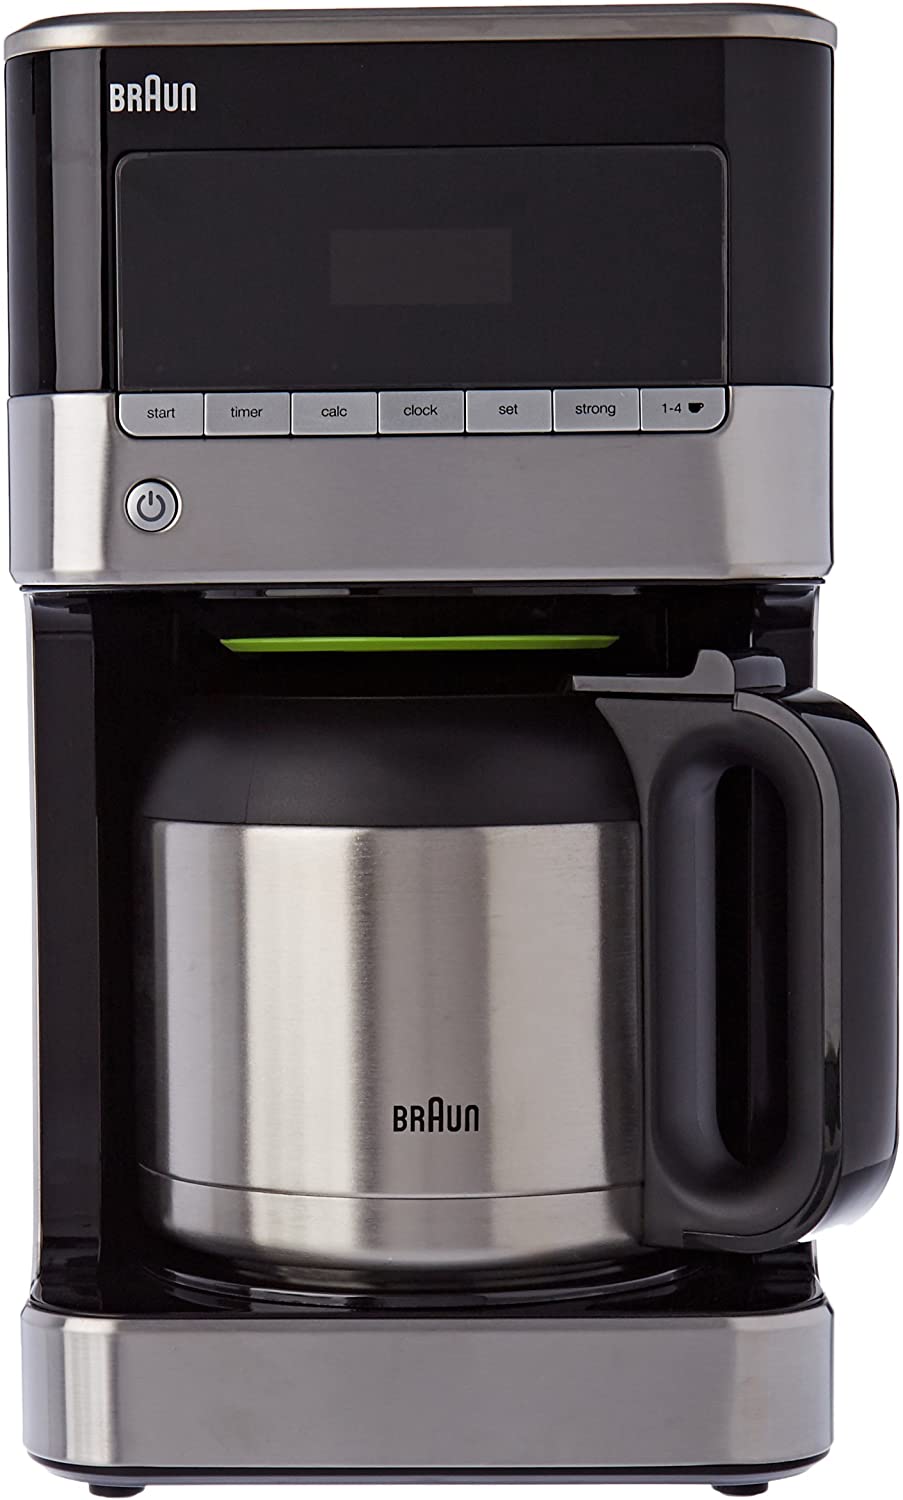 Braun PurAroma 7 Coffee Machine KF 7125 - Filter Coffee Machine with Thermos Flask and Timer Function, Coffee Maker for Unique Aroma, 1000 Watt, Black/Stainless Steel